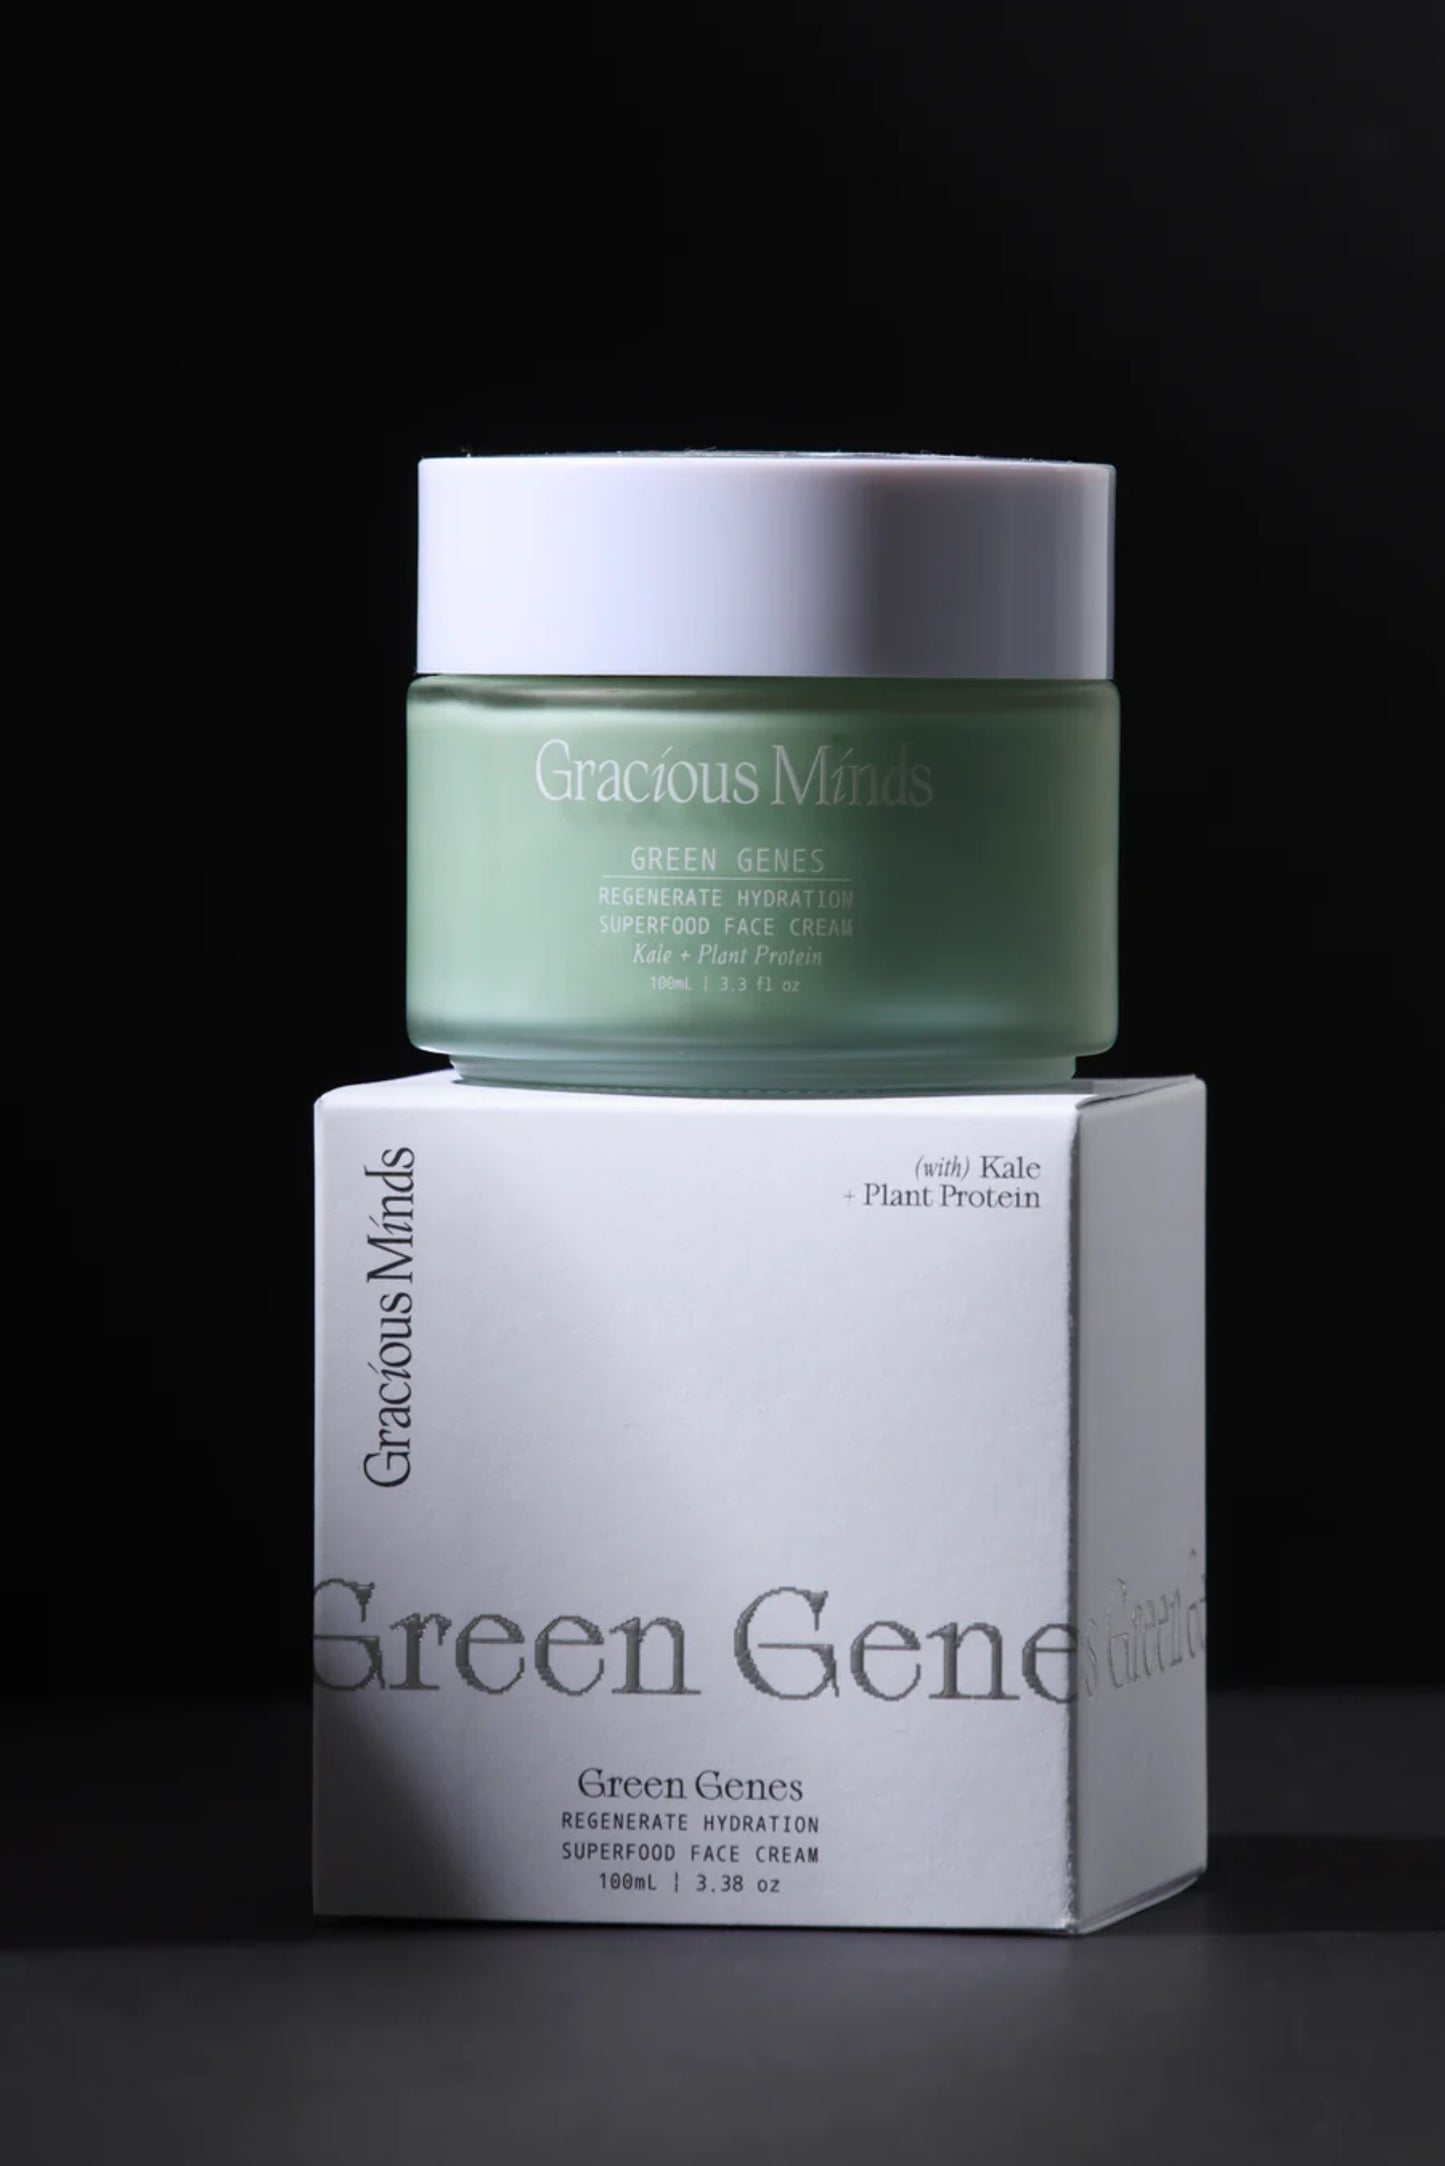 Gracious Minds Green Genes Regenerate Hydration Superfood Face Cream